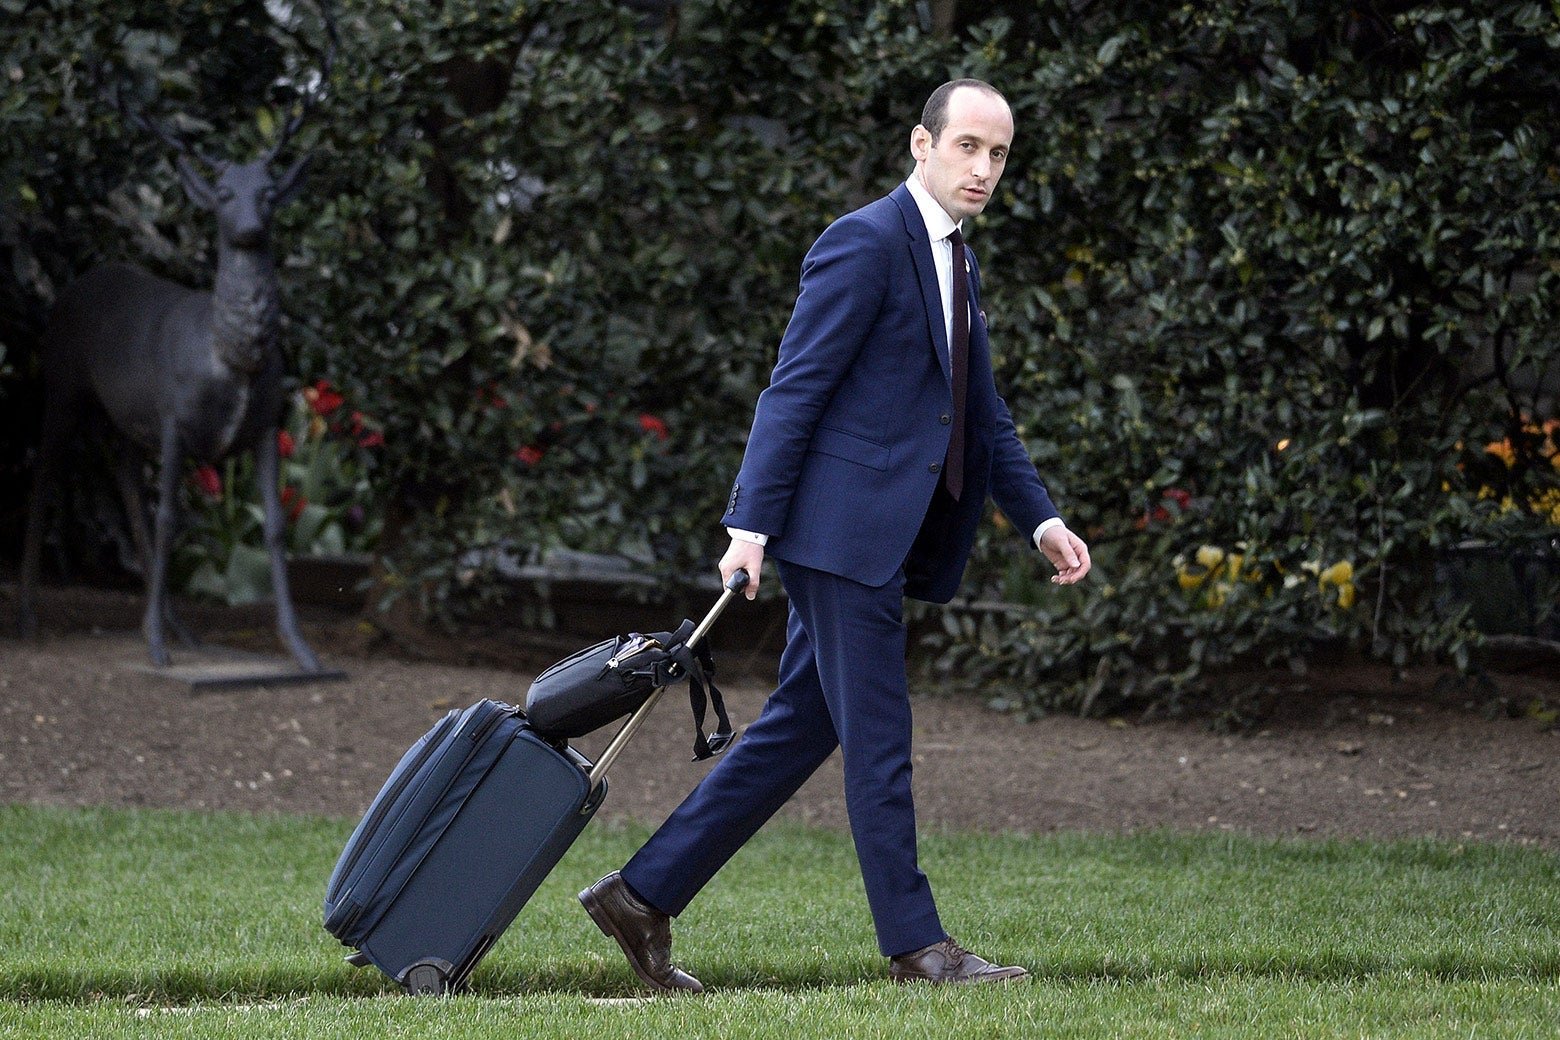 Stephen Miller walks on the White House lawn pulling a roller suitcase. 